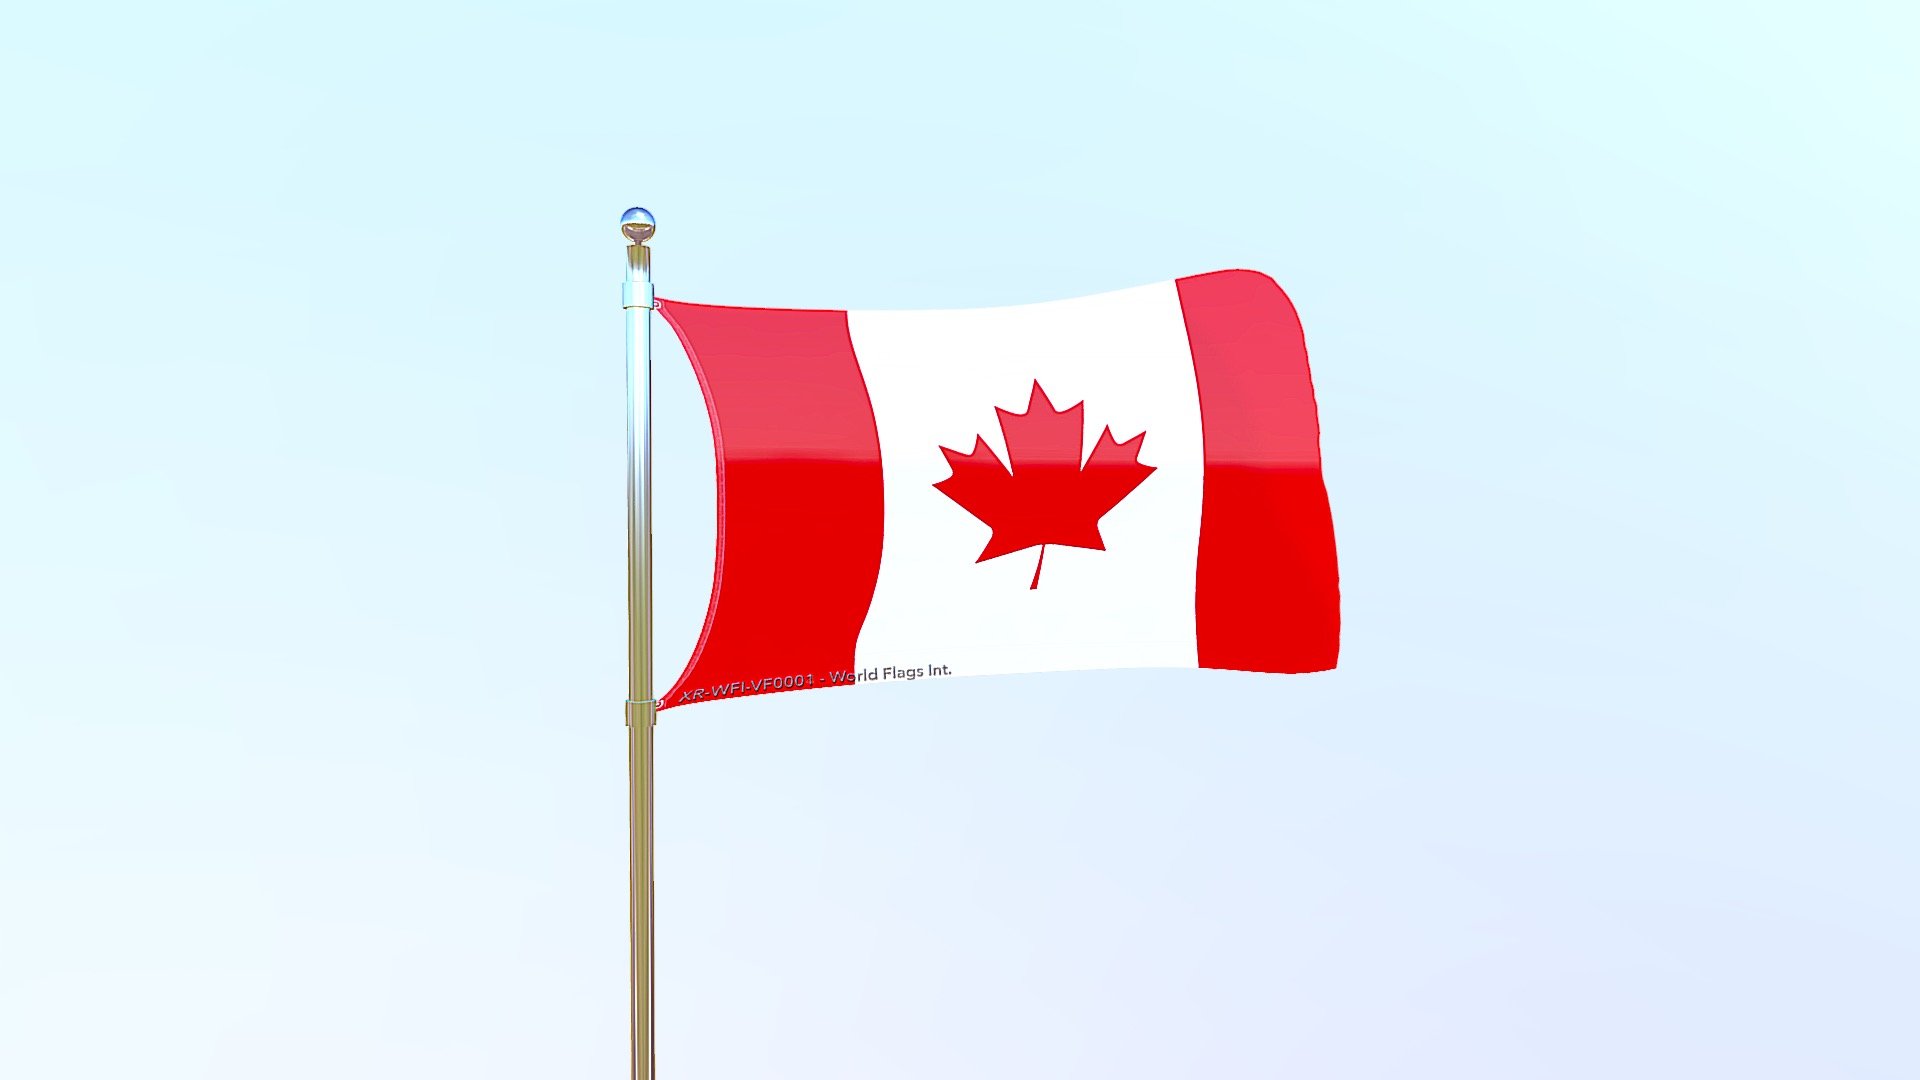 Flag Canada WFI-vf0001

World Flags International 3D Video Flags and Banners  Creation 

For Advertising, Editing, Marketing Campaign, Social Networks, Promotional Display, Projection in public space,  Multimedia Show, Live Streaming Plateform  or Video Game in METAVERSE.Contact /Comments

.

Special Thanks for Collaboration:  Lbro. Creative Graphic Designer 3D  @xrealis

.

The national flag of Canada (French: le Drapeau national du Canada), often simply referred to as the Canadian flag or, unofficially, as the Maple Leaf or l'Unifolié (French). &lsquo;the one-leafed'), consists of a red field with a white square at its centre

The image of the maple leaf used on the flag was designed by Jacques Saint-Cyr

Red and white are colors of historical significance to many nations, including those helped  Canada.  These colors as symbols of the natural splendors found in  regions of our country: the white of snow in winter, and the red of maple leaves in autumn - Flag Canada WFI-vf0001 - 3D model by World Flags (@worldflags) 3d model